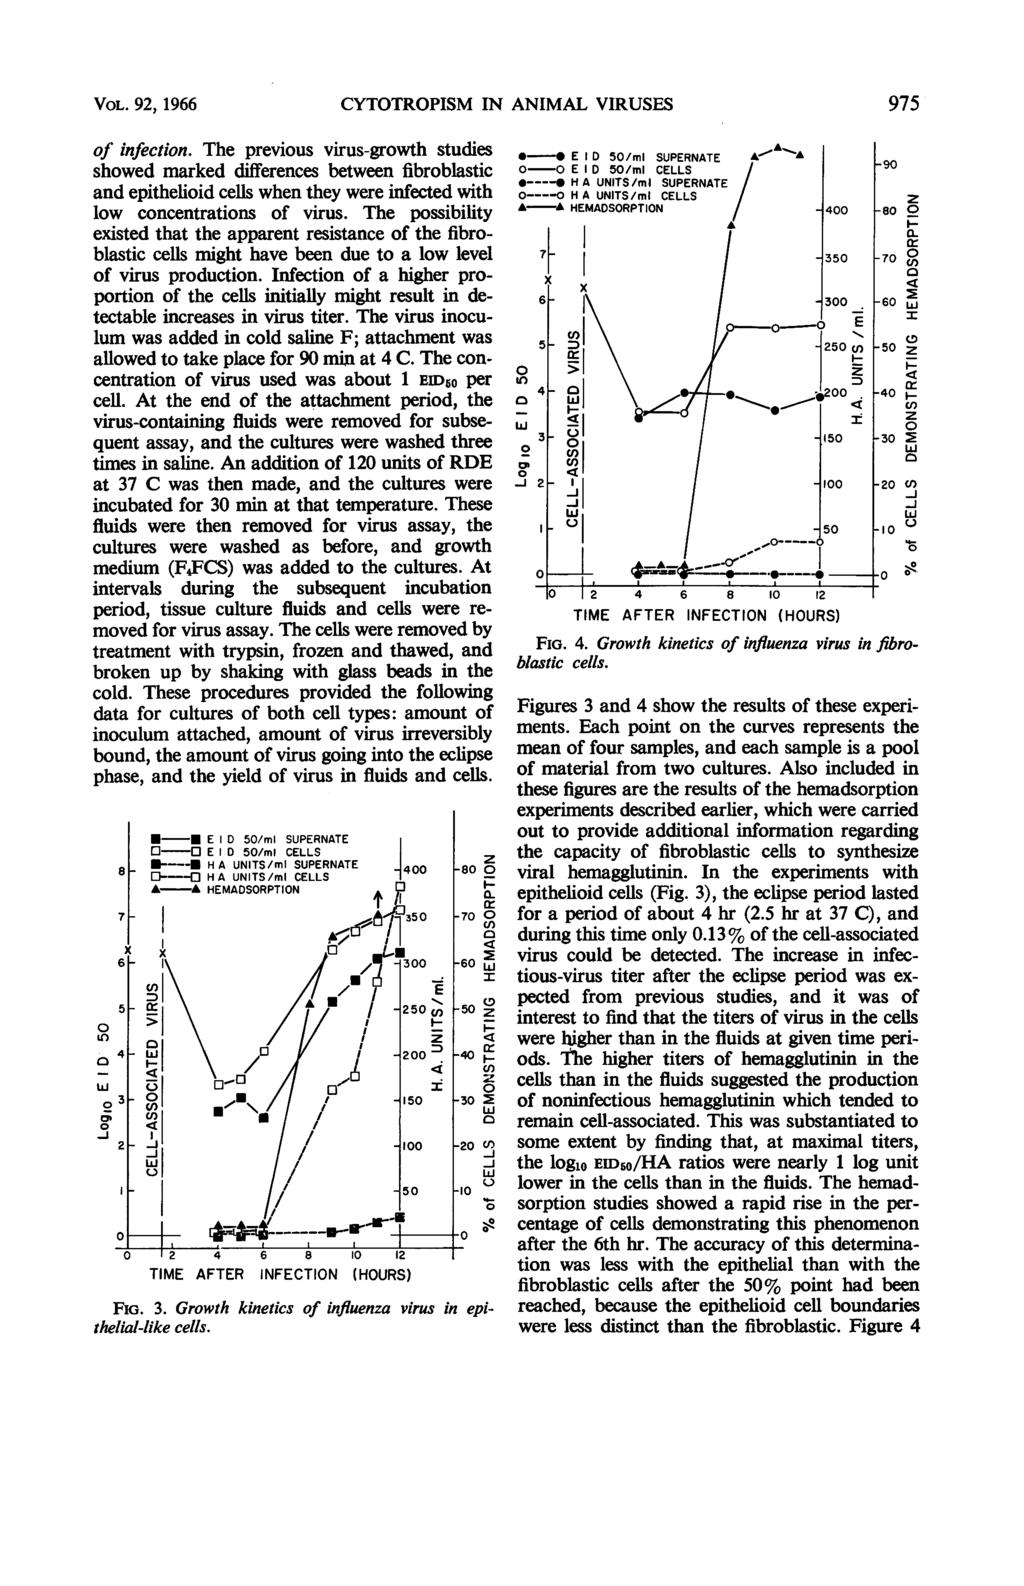 VOL. 92, 1966 of infection. The previous virus-growth studies showed marked differences between fibroblastic and epithehoid cells when they were infected with low concentrations of virus.